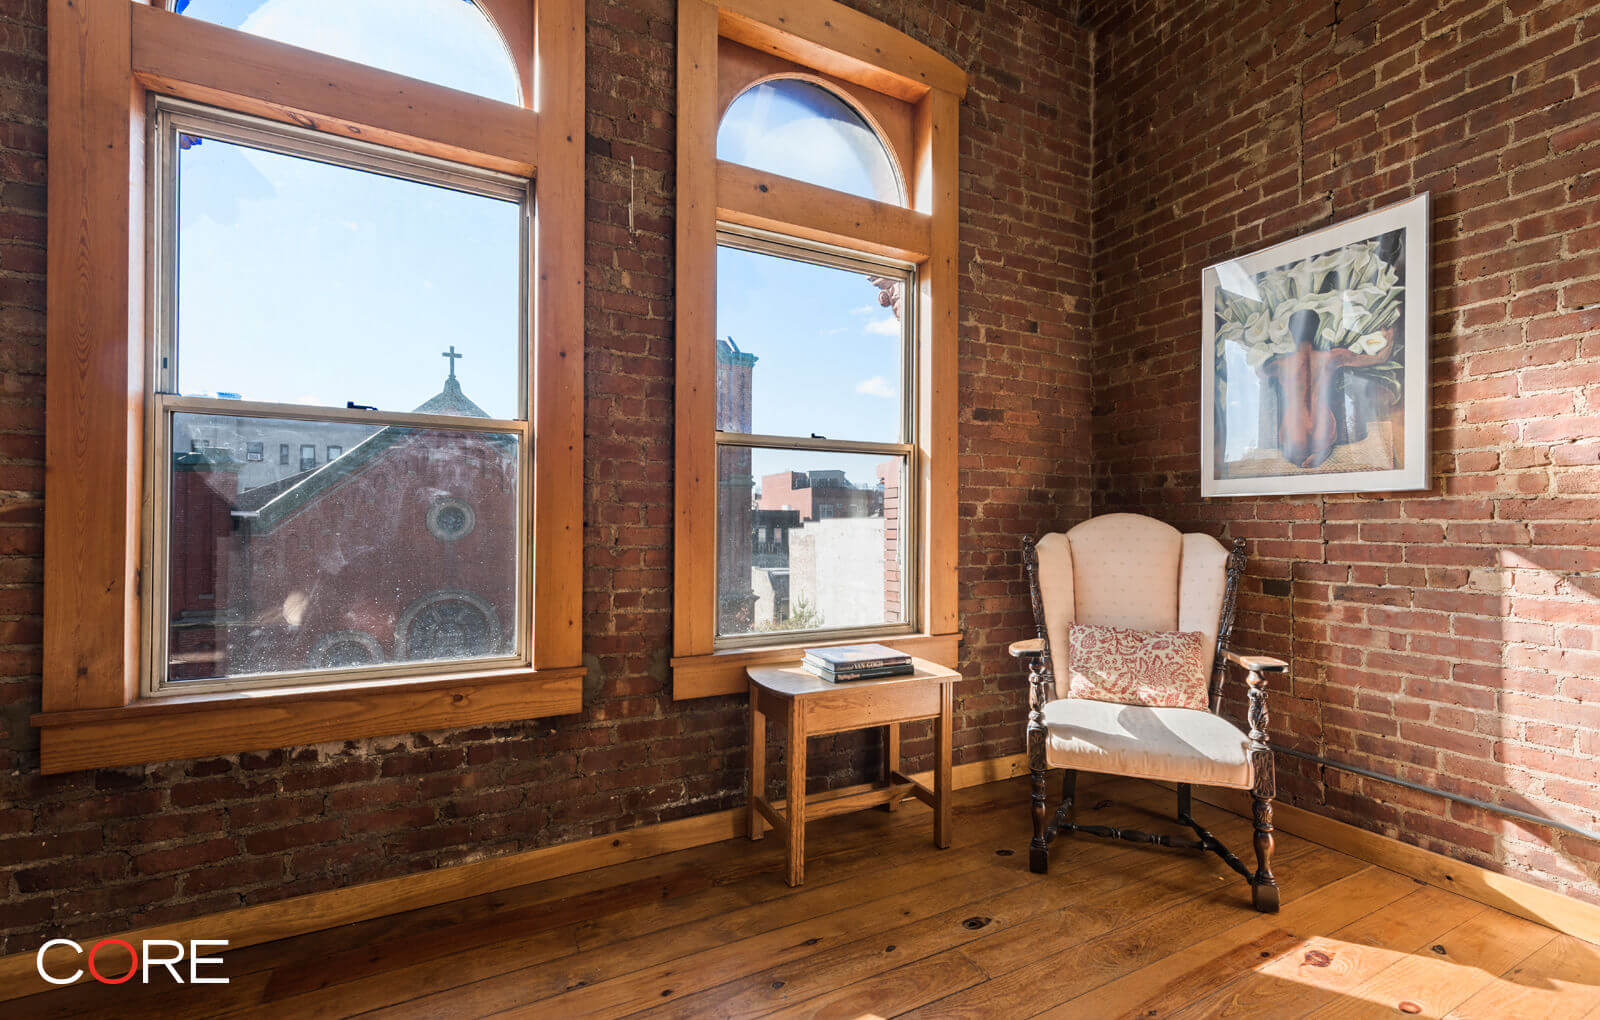 Brooklyn Homes for Sale in Williamsburg at 109 S. 9th Street